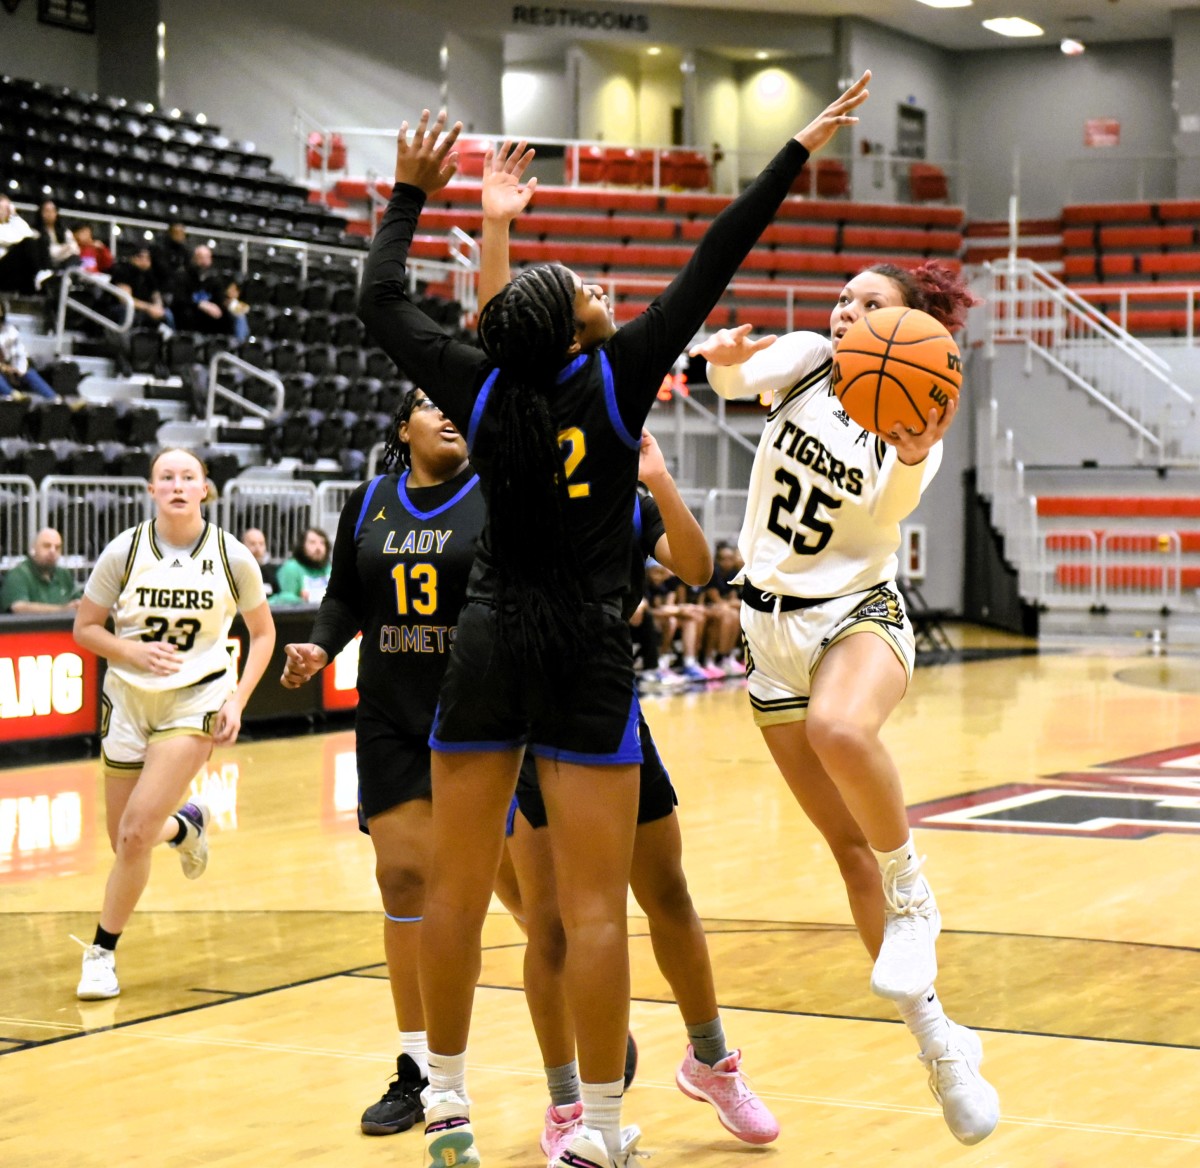 Broken Arrow junior guard McKenzie Mathurin (with ball) drives in for a shot during a recent game. Mathurin has committed to play college basketball at the University of Nebraska.